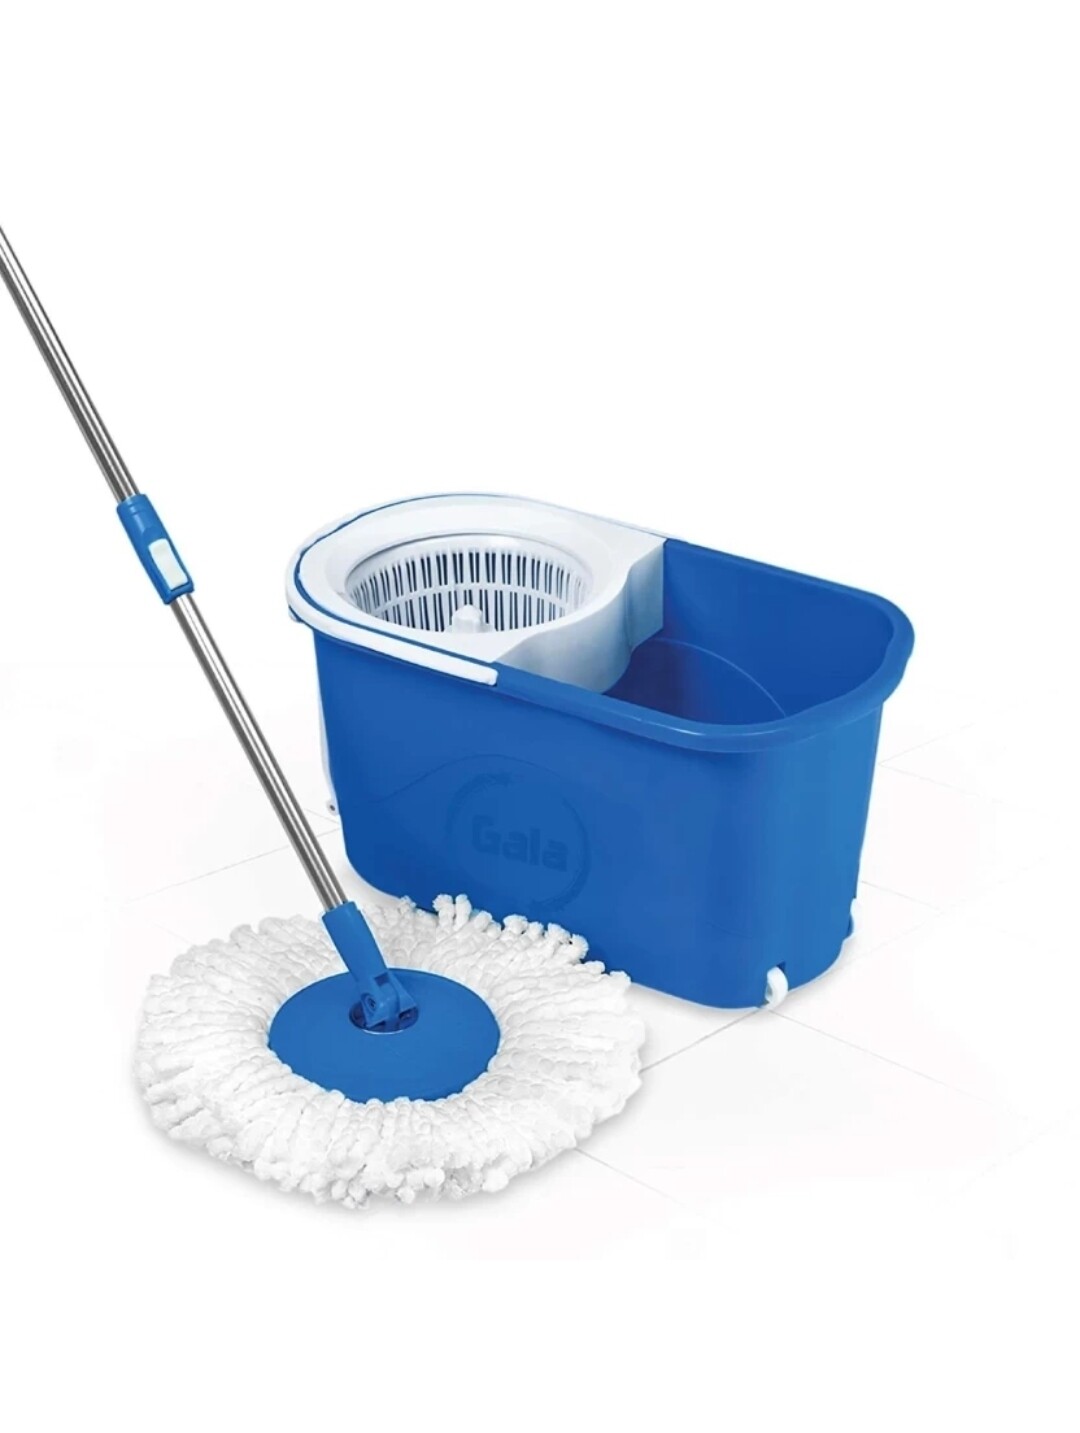 Gala Quick Spin Mop